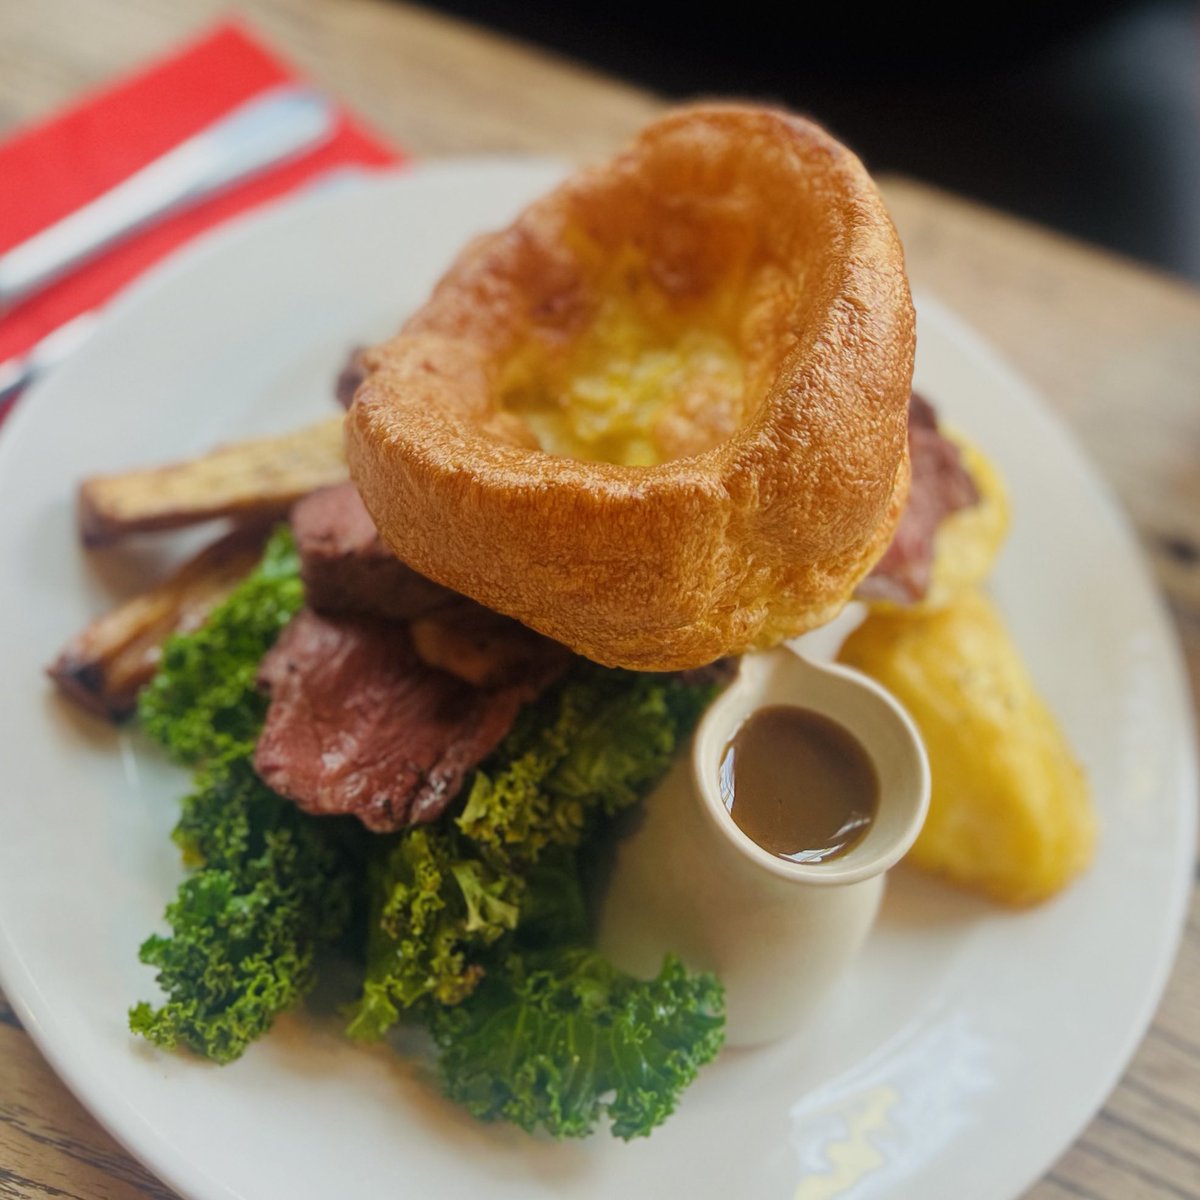 First bank holiday of the new year is on its way, and it’s exxxtraaa long! With a traditional pie night on Good Friday, then shacking all day for boat race Saturday with live music, ending the weekend with back to back roast days to celebrate the Easter weekend! @YoungsPubs